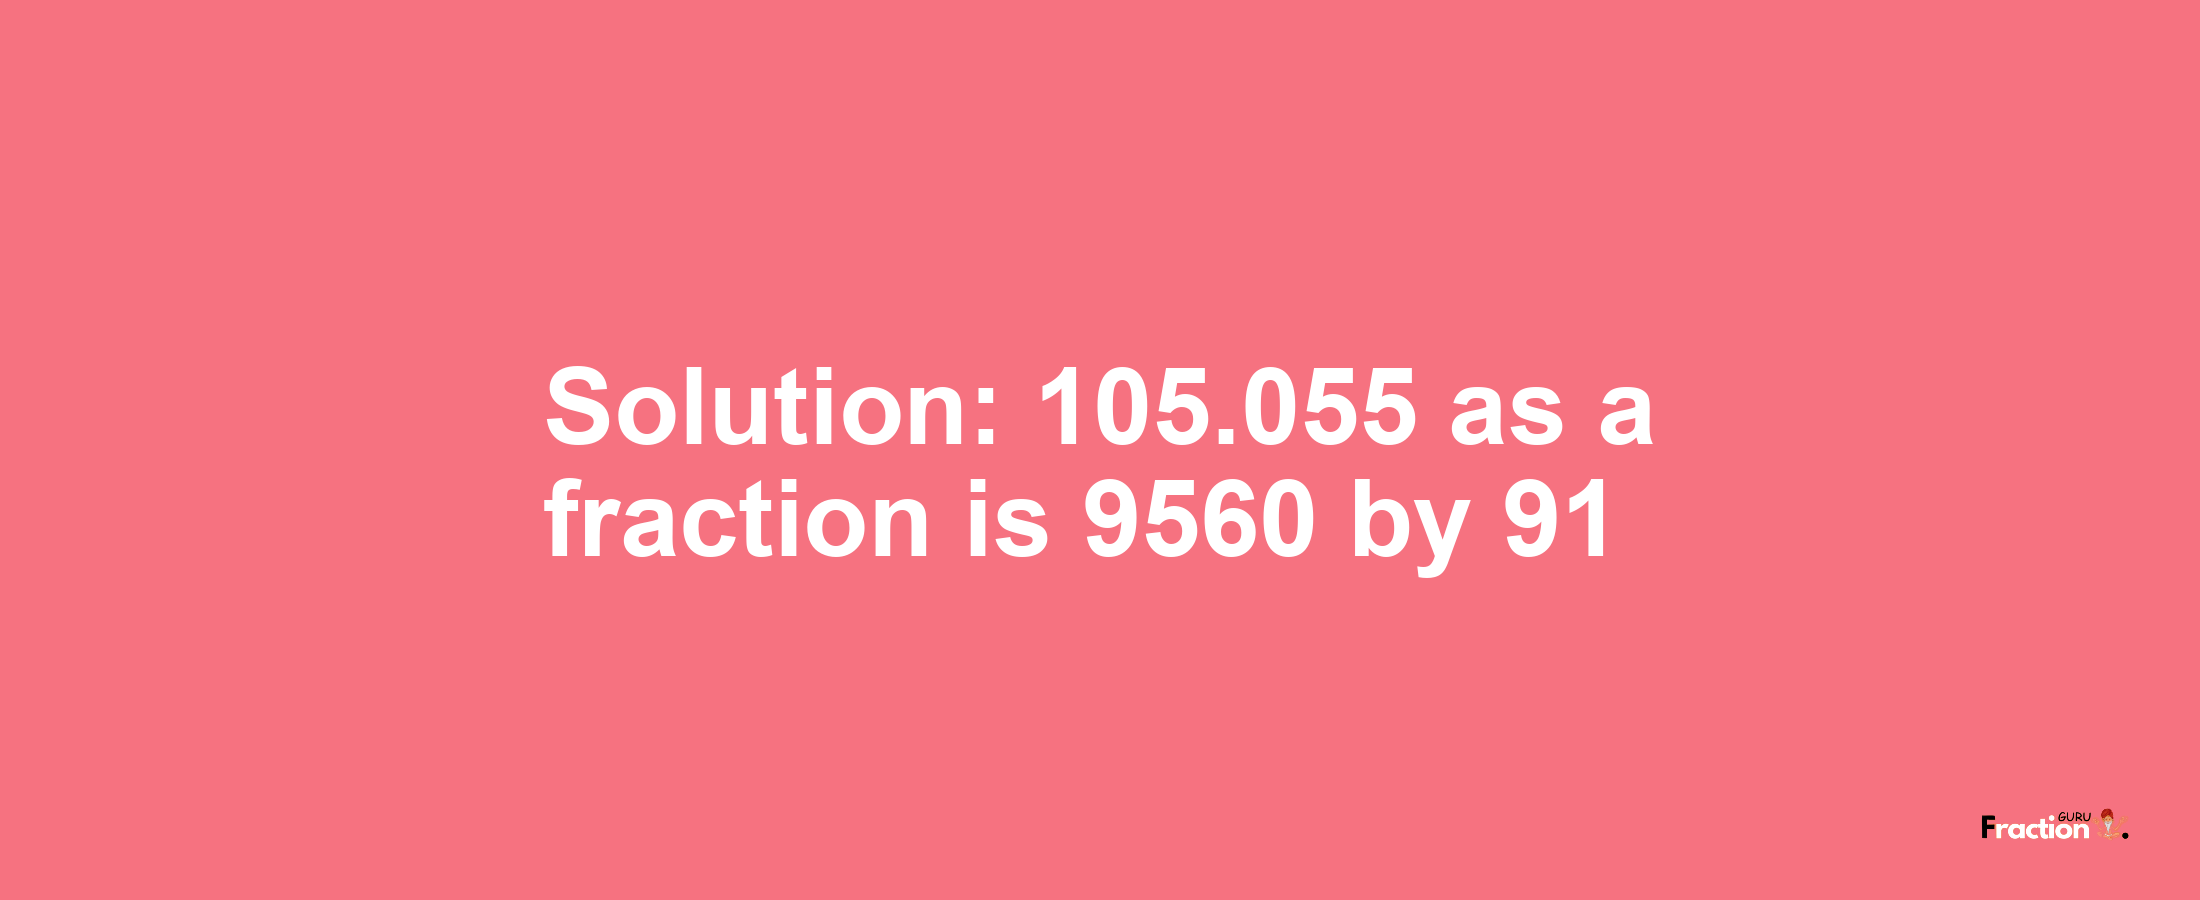 Solution:105.055 as a fraction is 9560/91